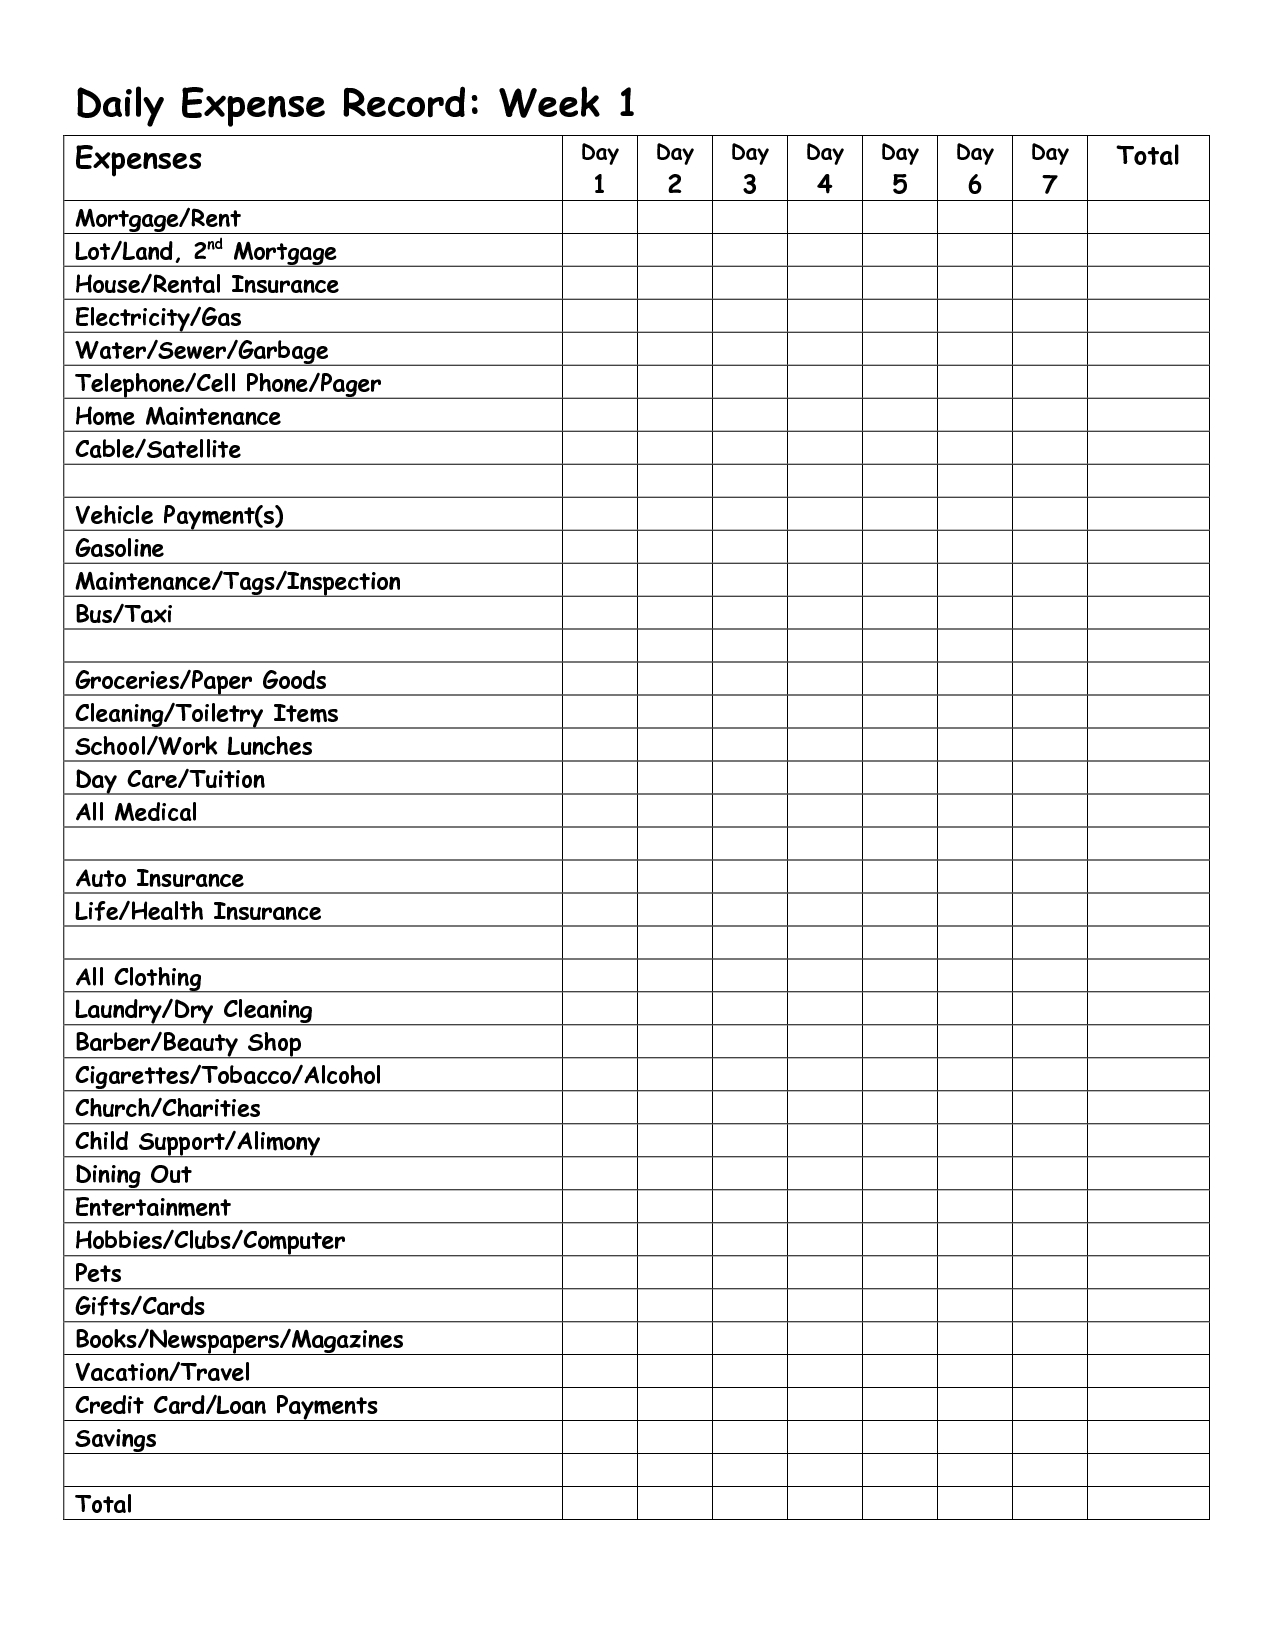 Monthly Expense Report Template | Daily Expense Record Week For Daily Expense Report Template